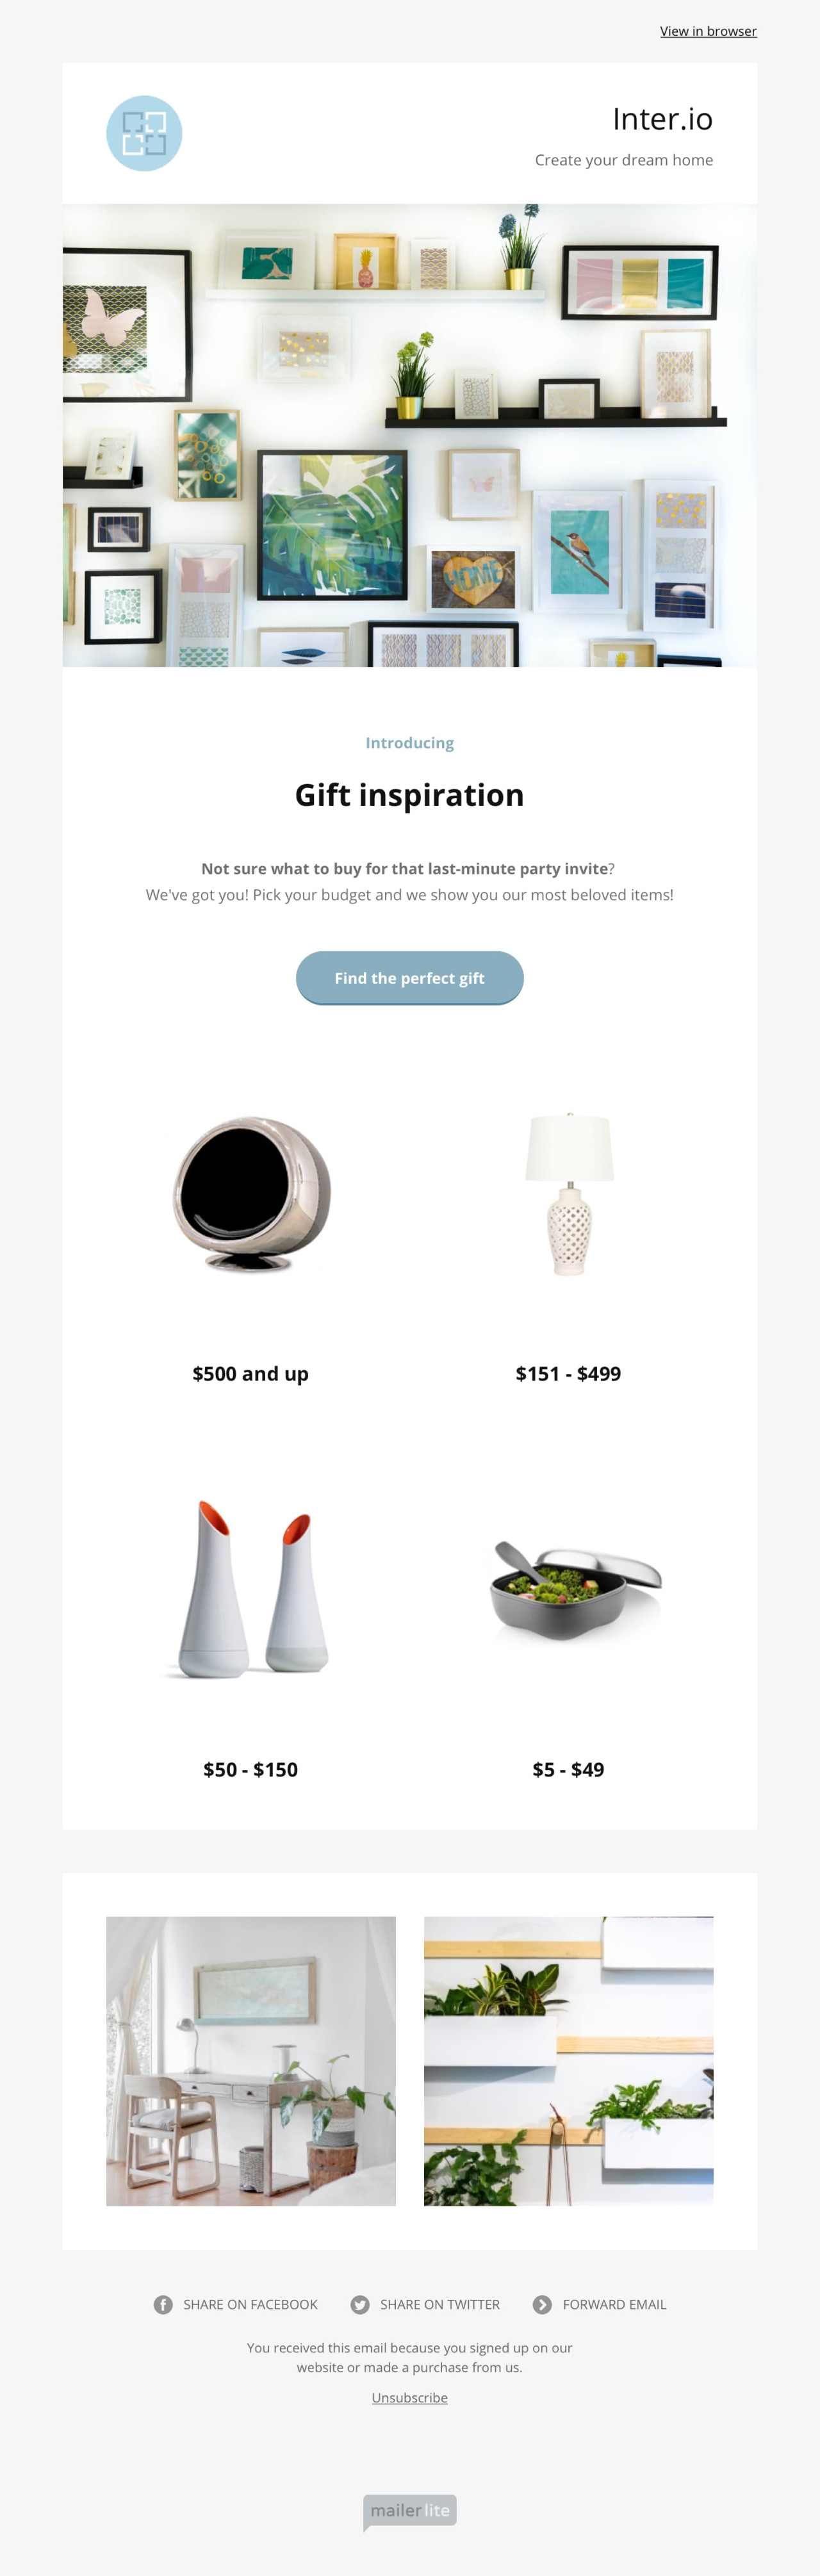 Interior design email template - Made by MailerLite